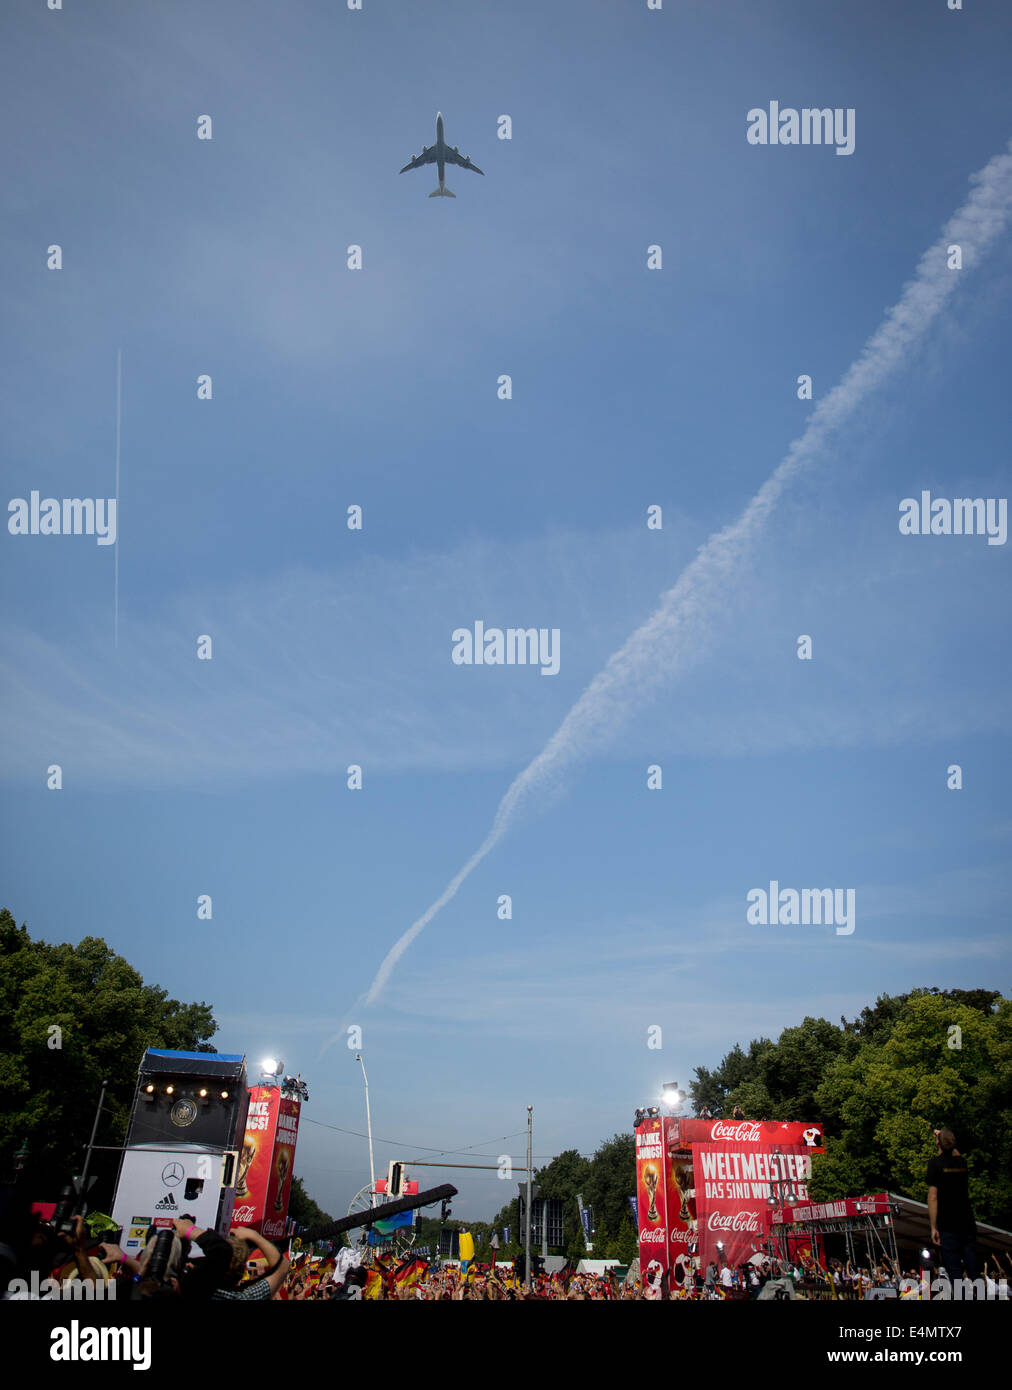 Berlin, Germany. 15th July, 2014. Fans cheer the airliner carrying the German national soccer team as it passes over the fan fest at Brandenburg Gate in Berlin, Germany, 15 July 2014.The German team on 13 July 2014 had won the Brazil 2014 FIFA Soccer World Cup final against Argentina by 1-0 to win the title for the fourth time after 1954, 1974 and 1990. /Alamy Live News Stock Photo